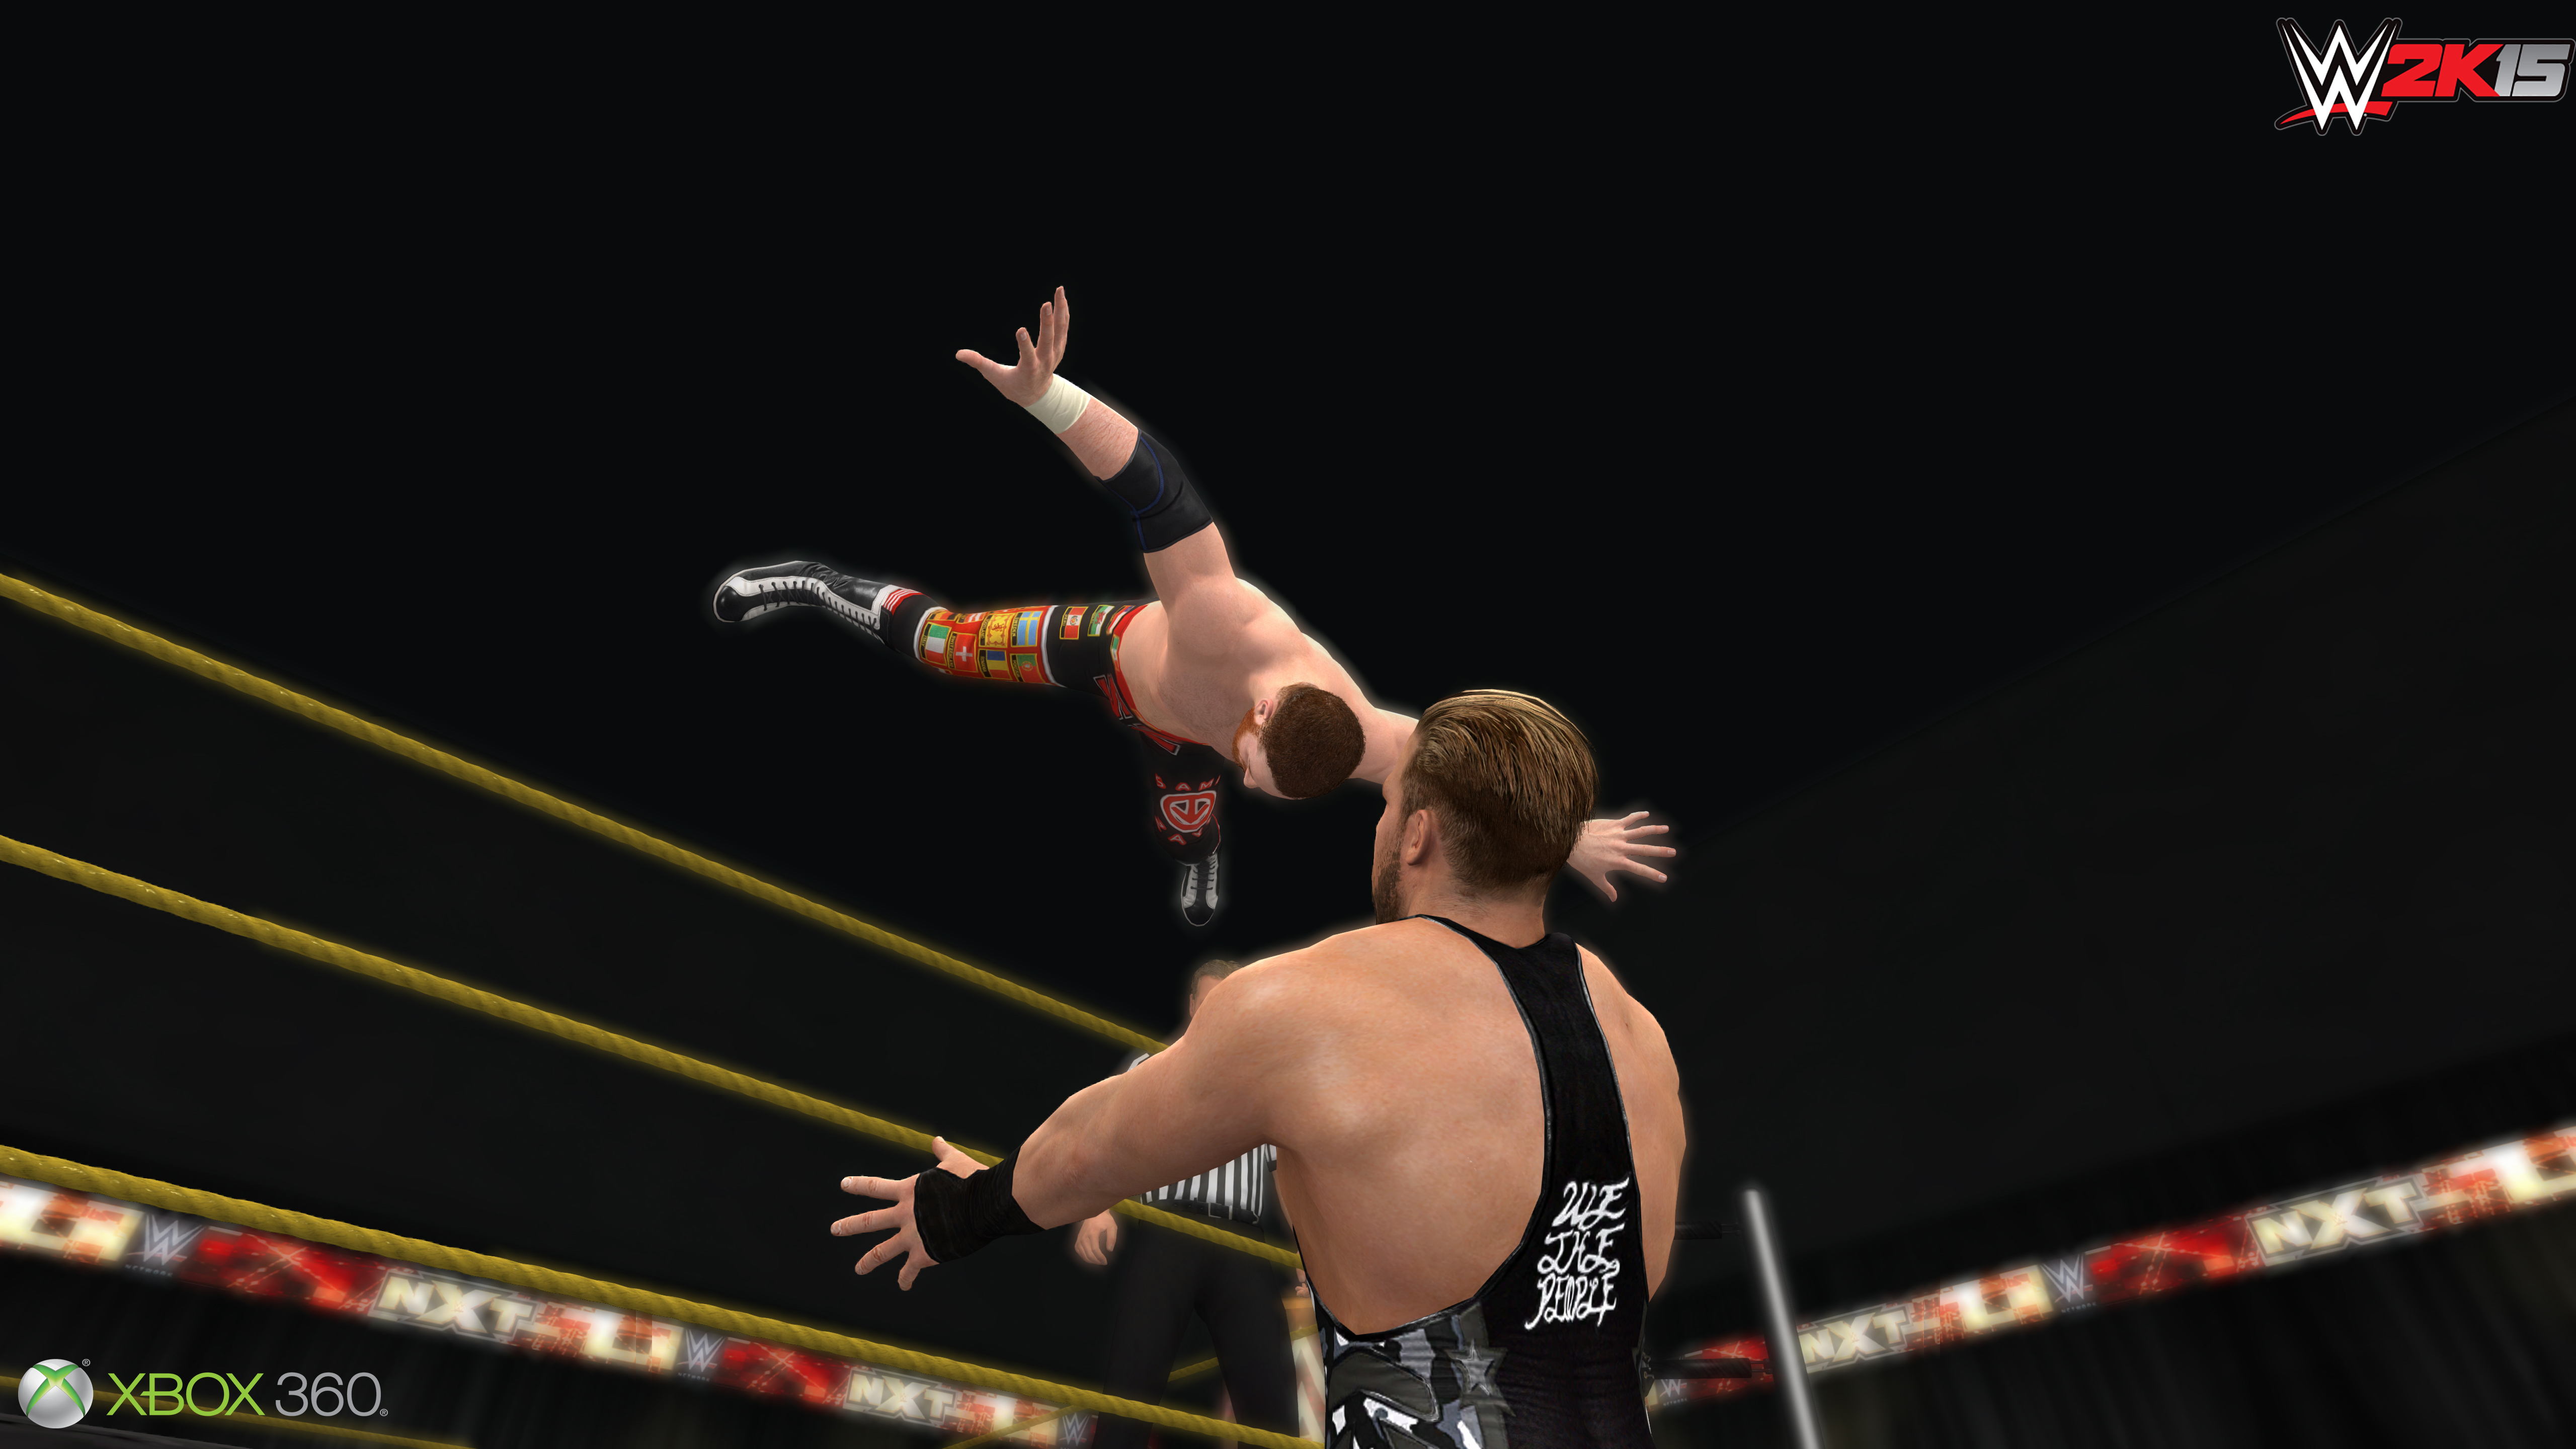 You 2k15? finishers do do how in wwe A step